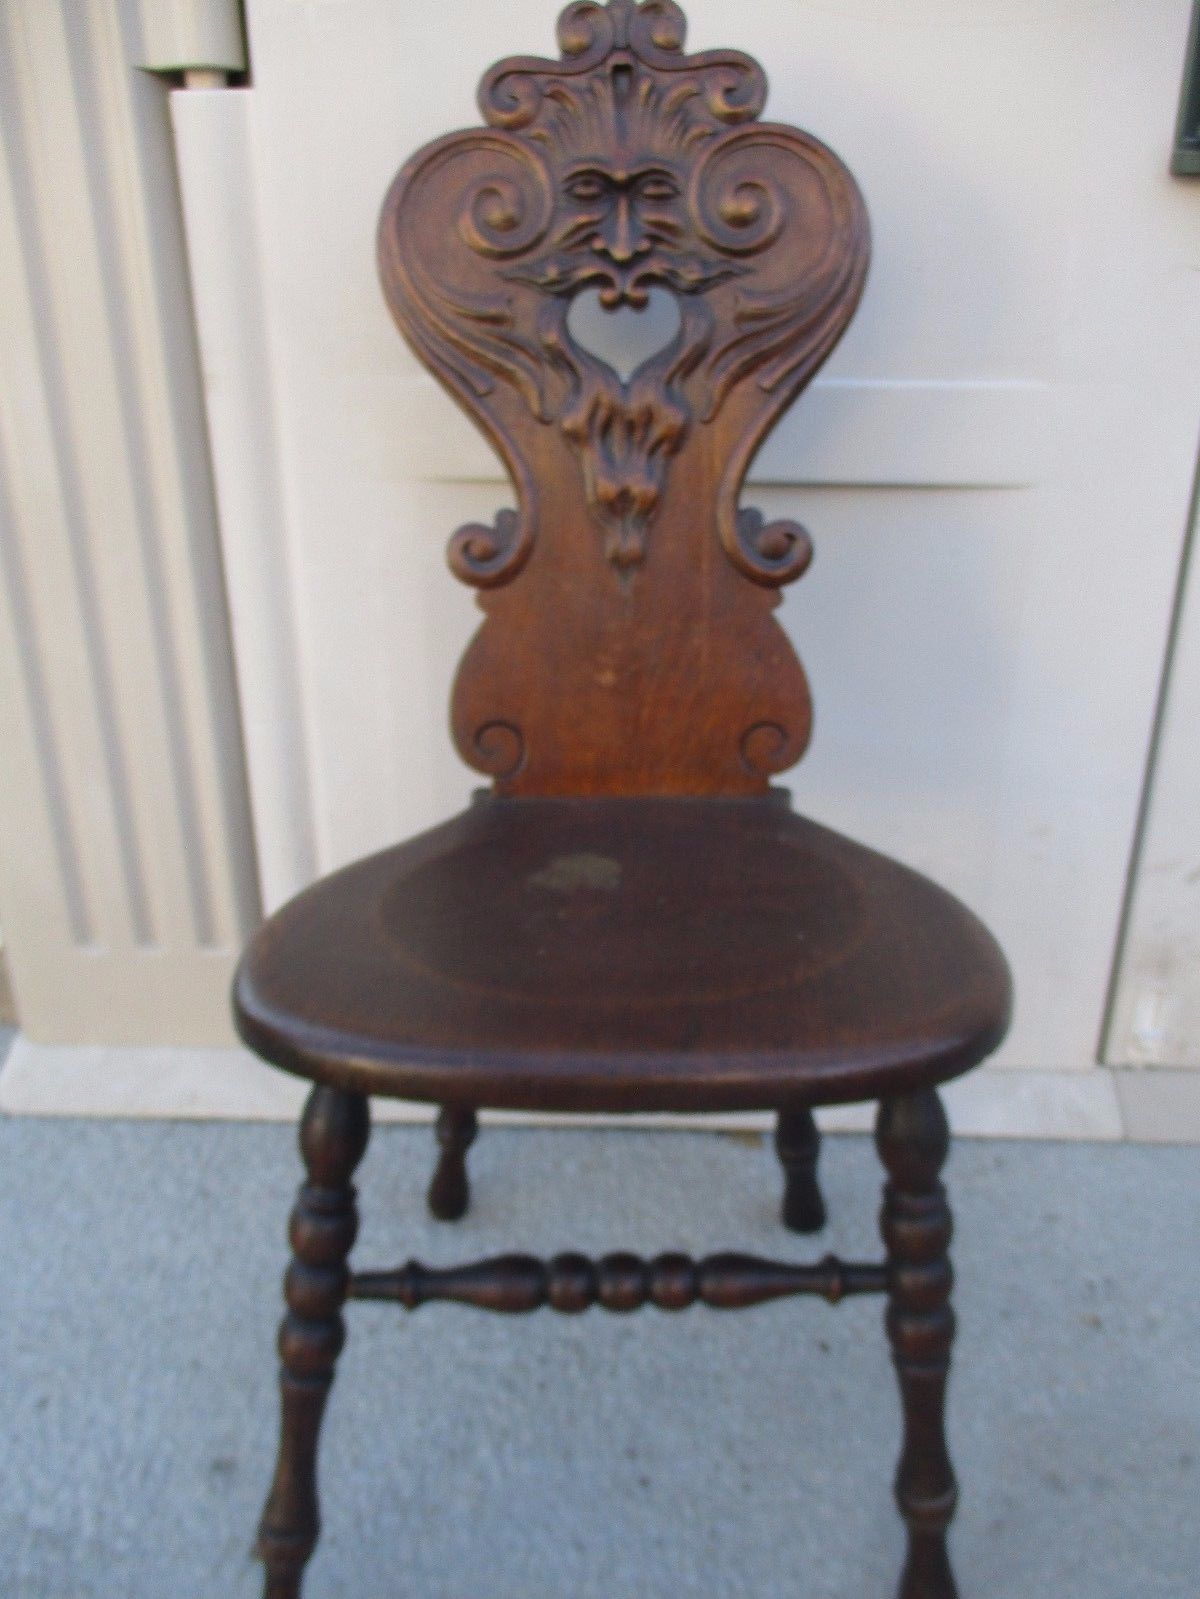 Antique Hand Carved Wood Chair Unique Very Unusual North Wind Face